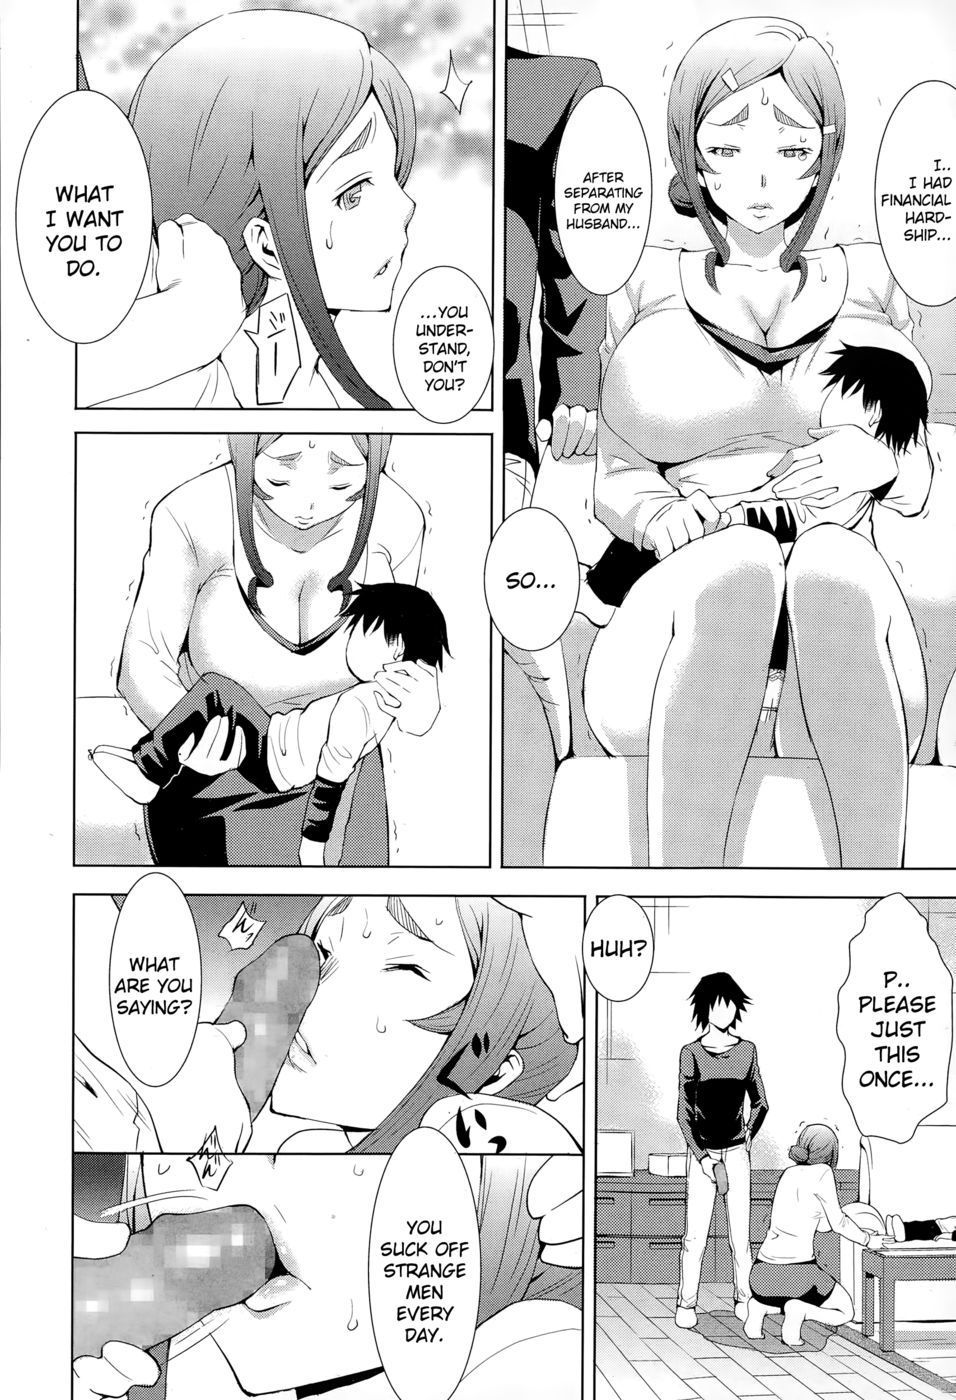 secret of a housewife hentai